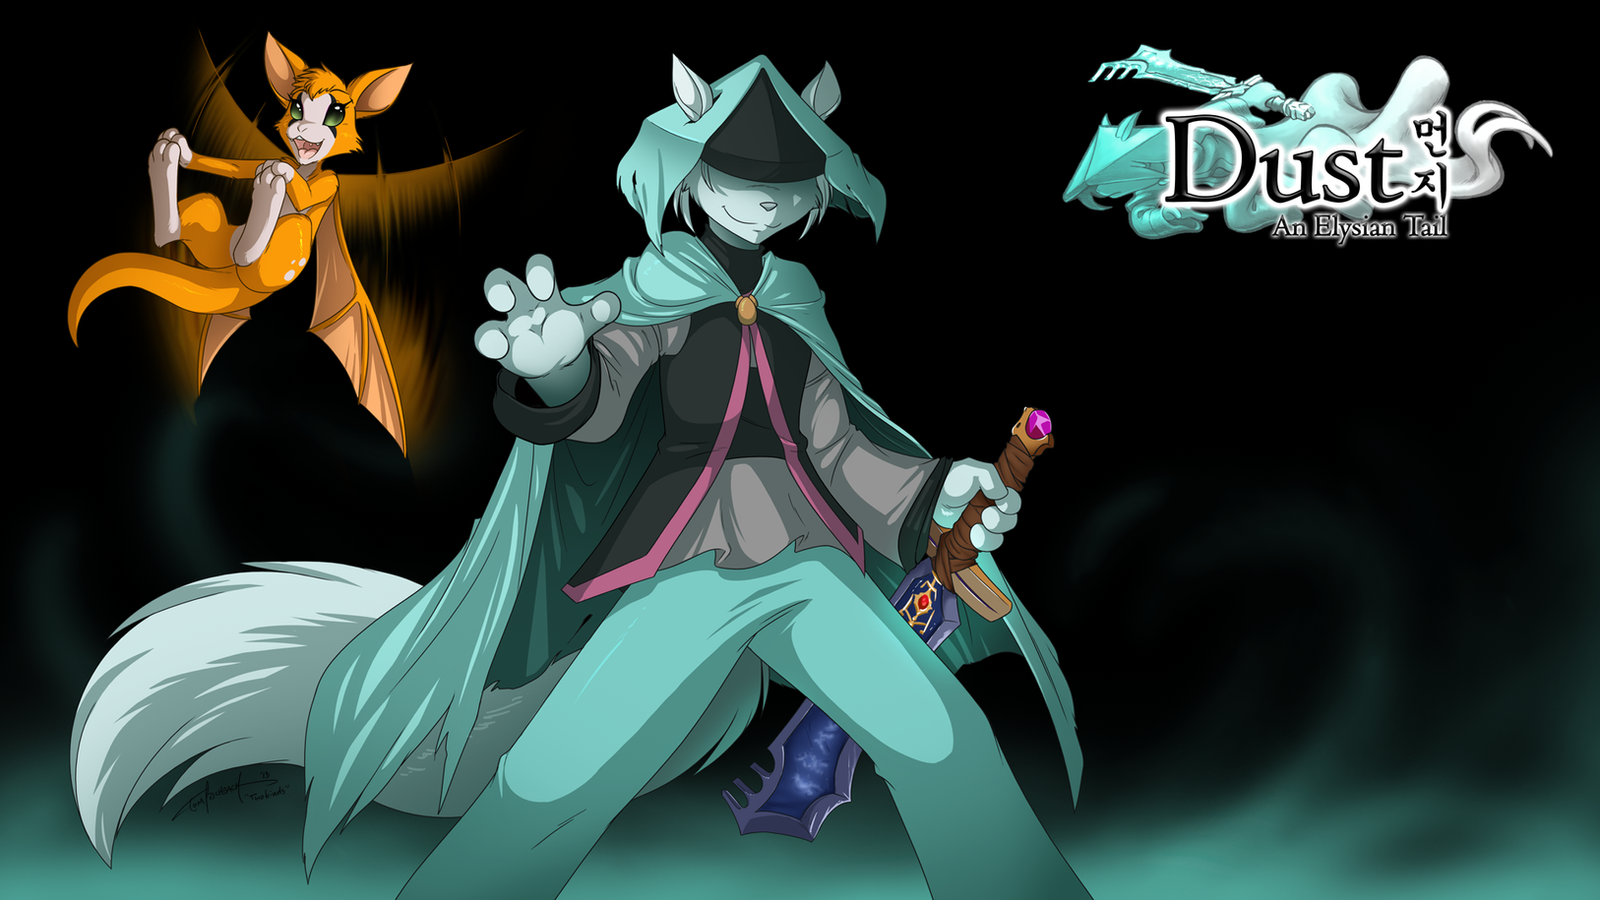 dust__an_elysian_tail_fanart_wallpaper_by_twokinds-d6g9wnw.png